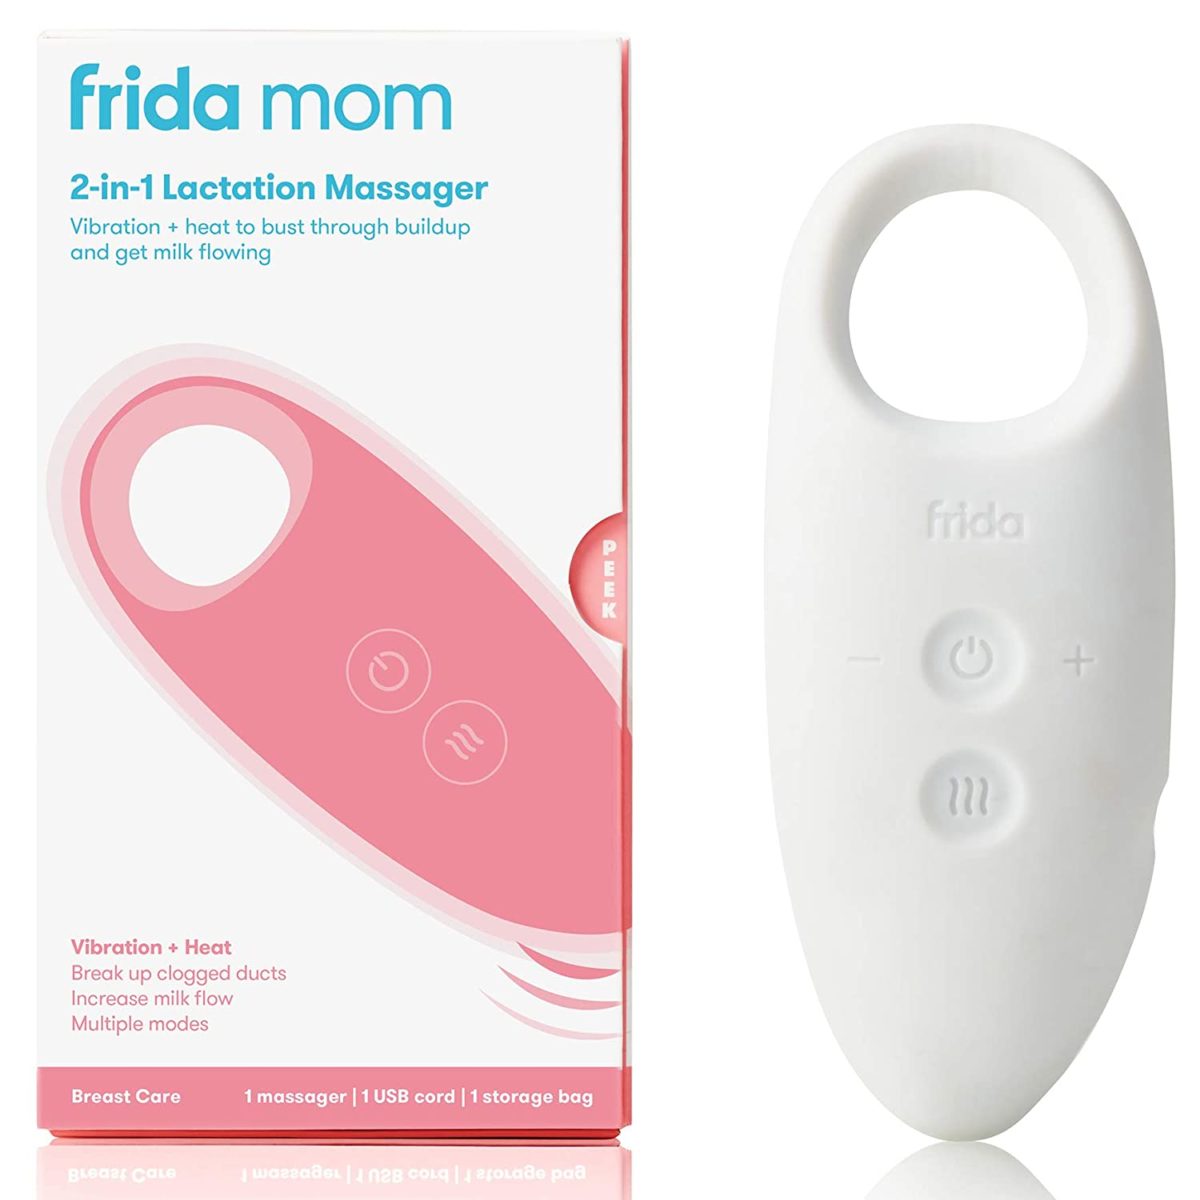 moms are thrilled with frida's new breastfeeding ad, here are some of their other products | moms were thrilled to see frida's new breastfeeding ad.